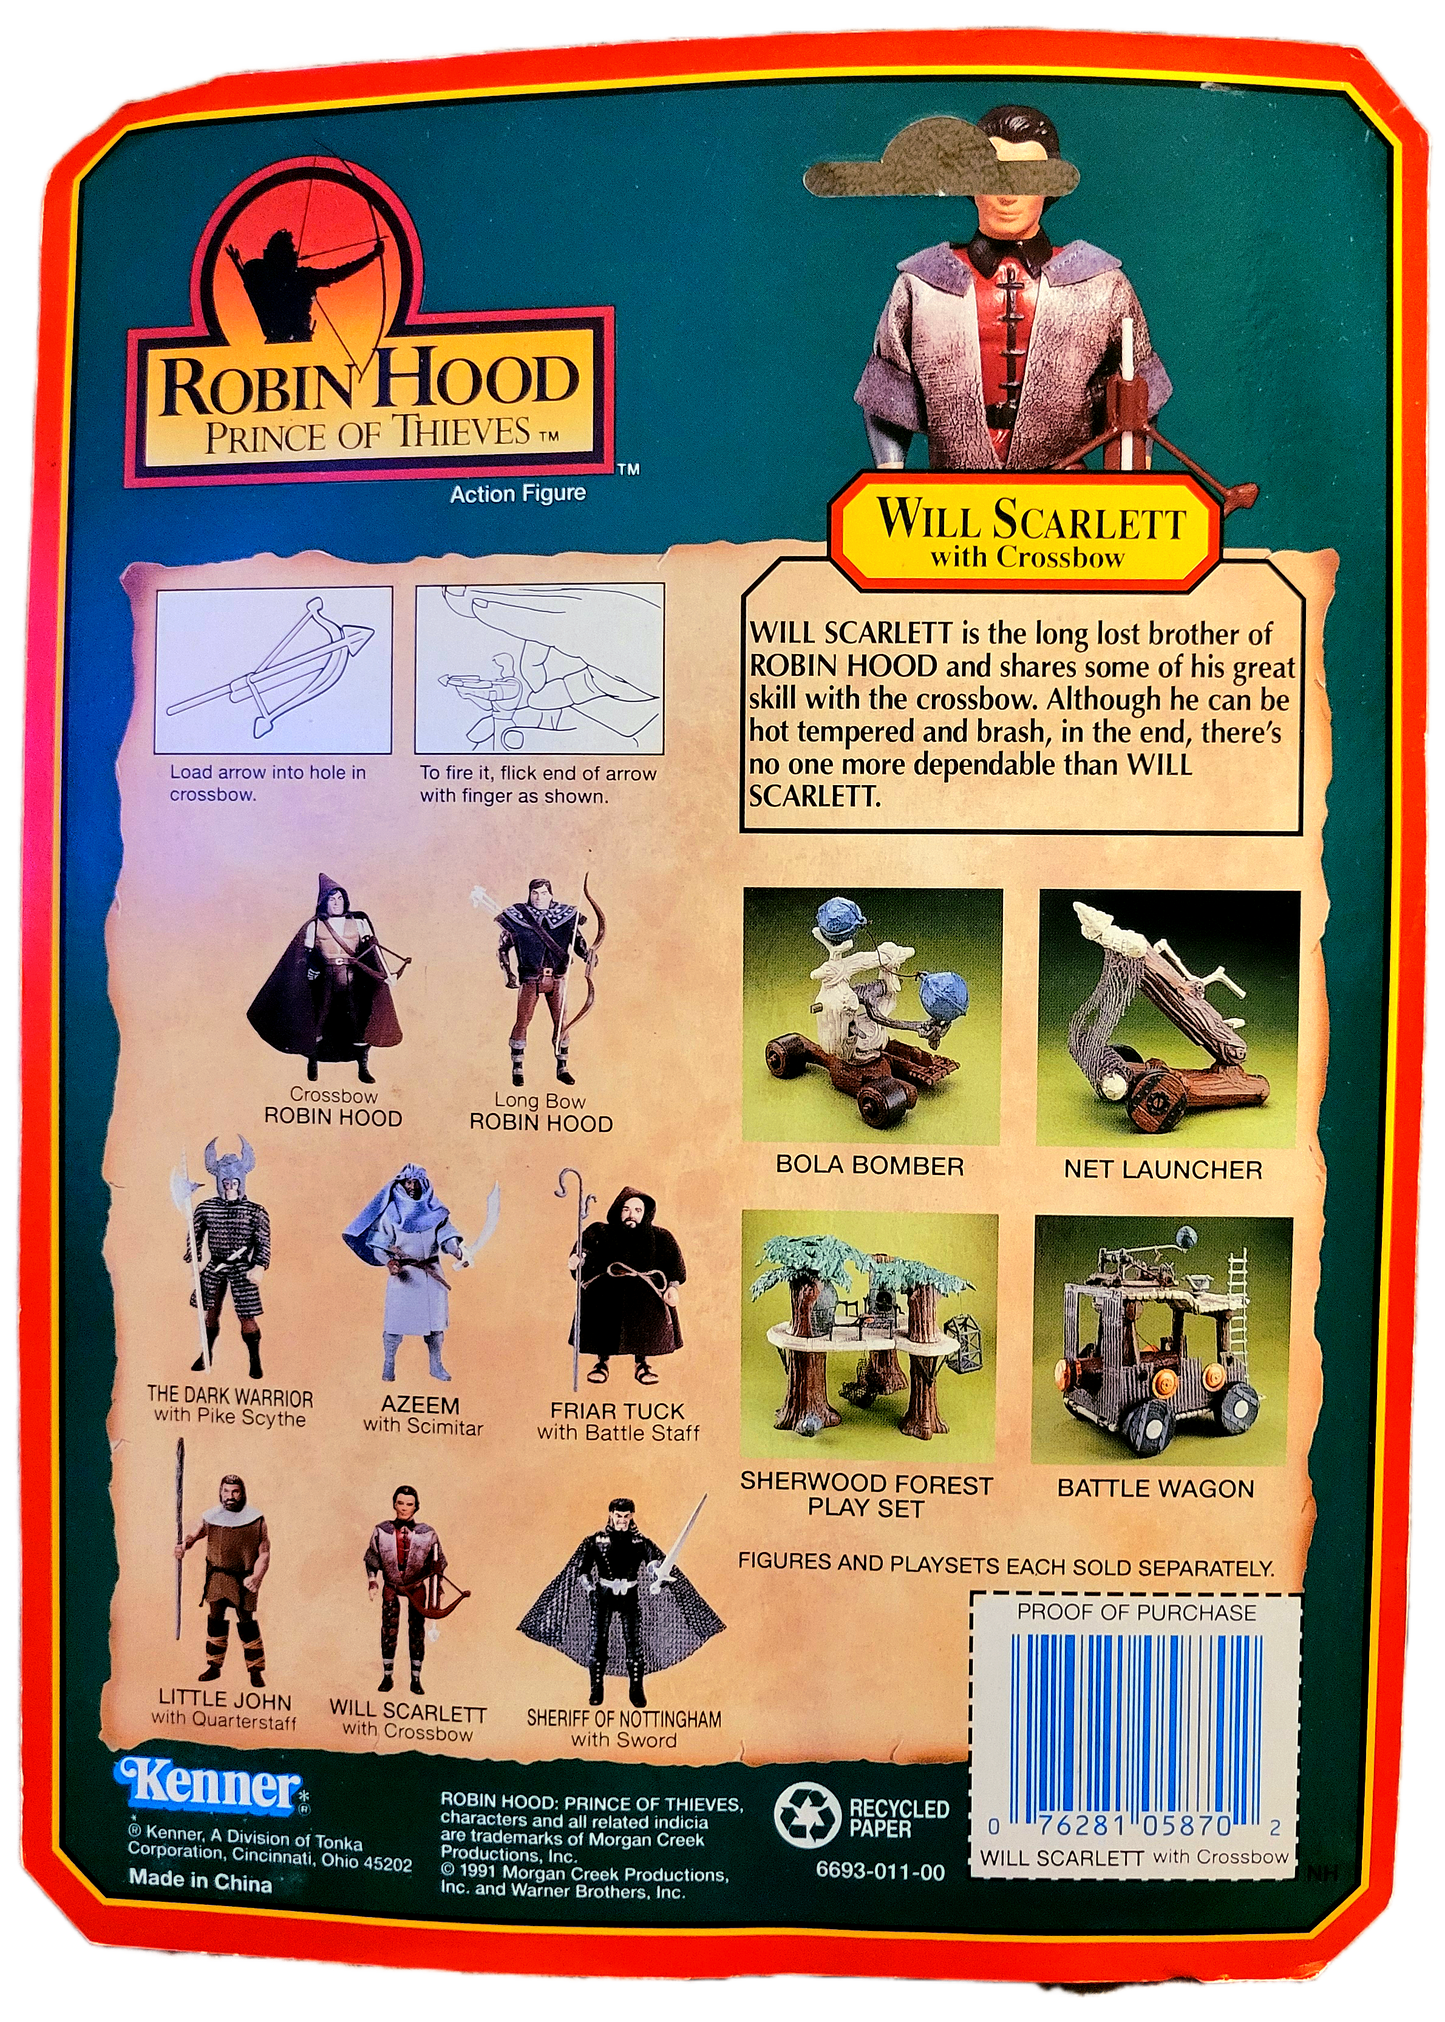 Kenner 1991 Robin Hood Prince of Thieves Will Scarlett with Crossbow Action Figure